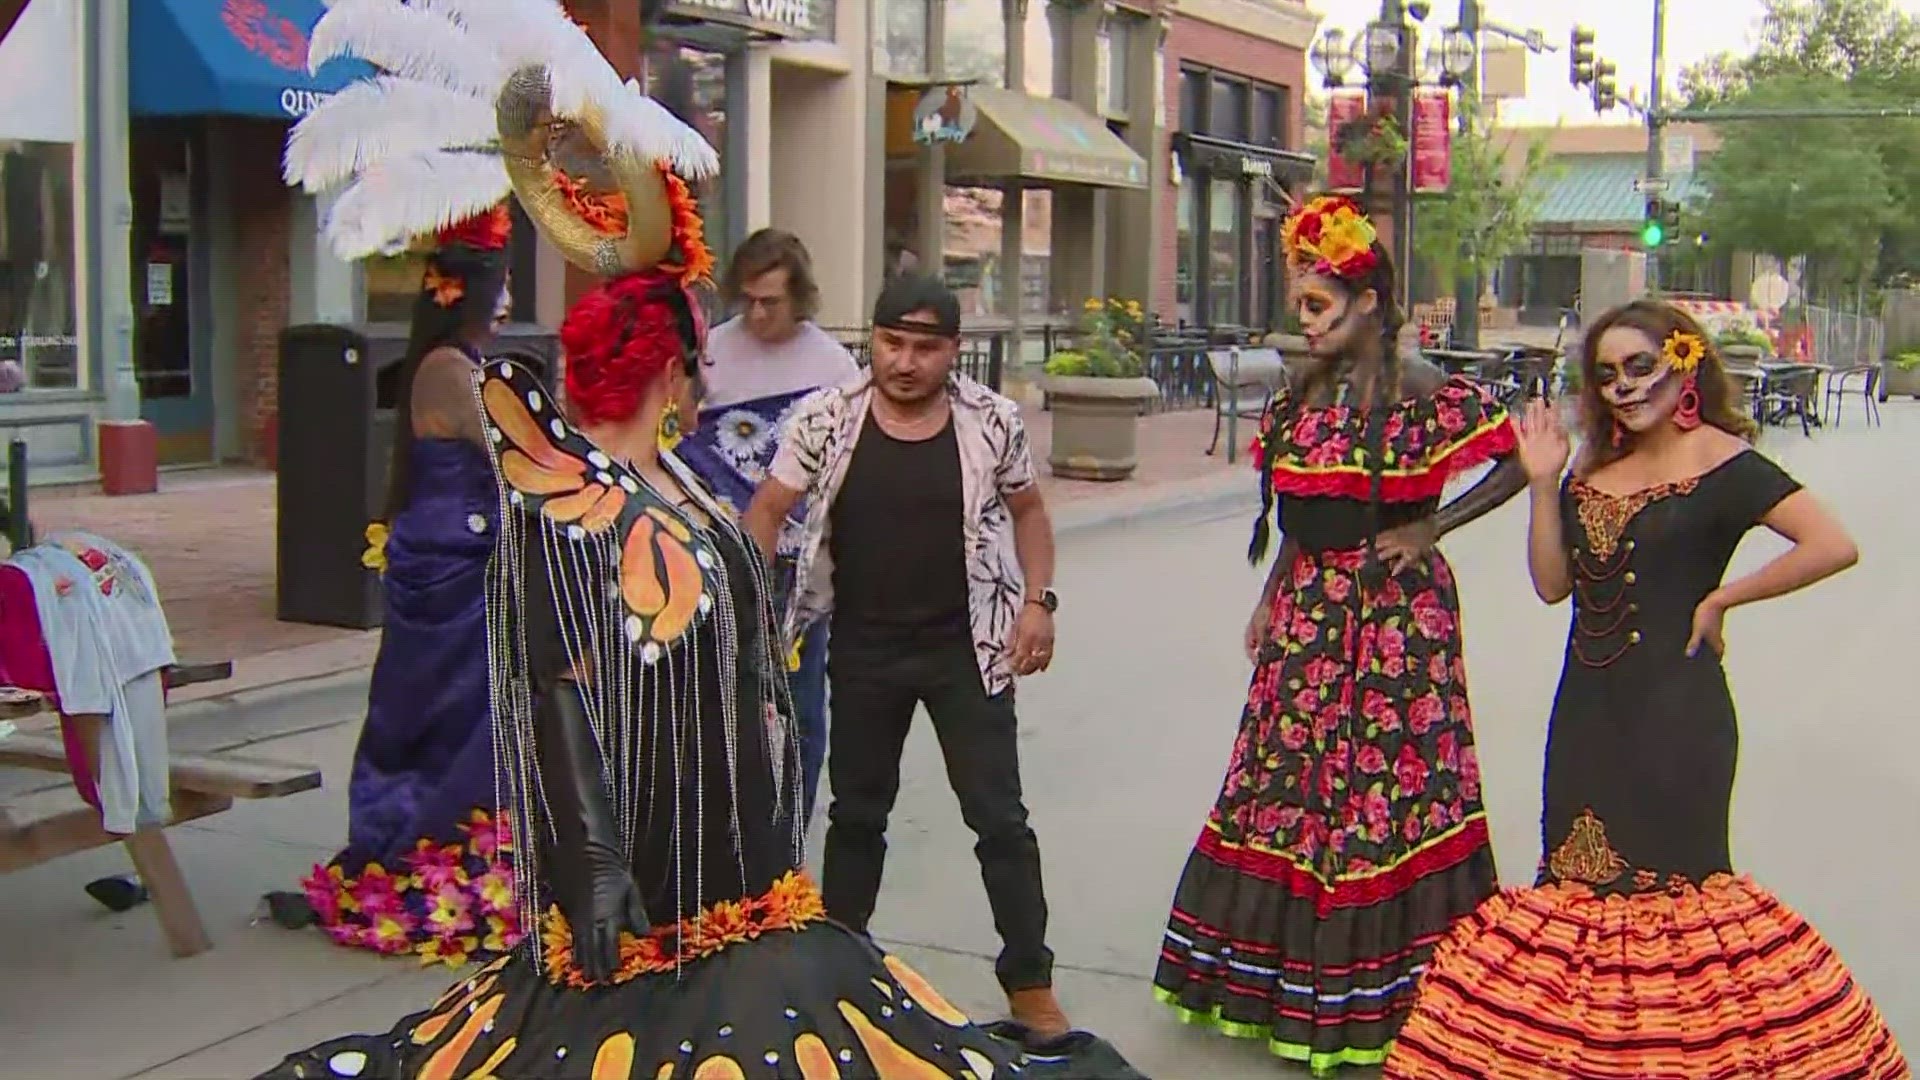 The celebration of Denver's sister city status with Cuernavaca, Mexico and Hispanic heritage goes from July 21-23.